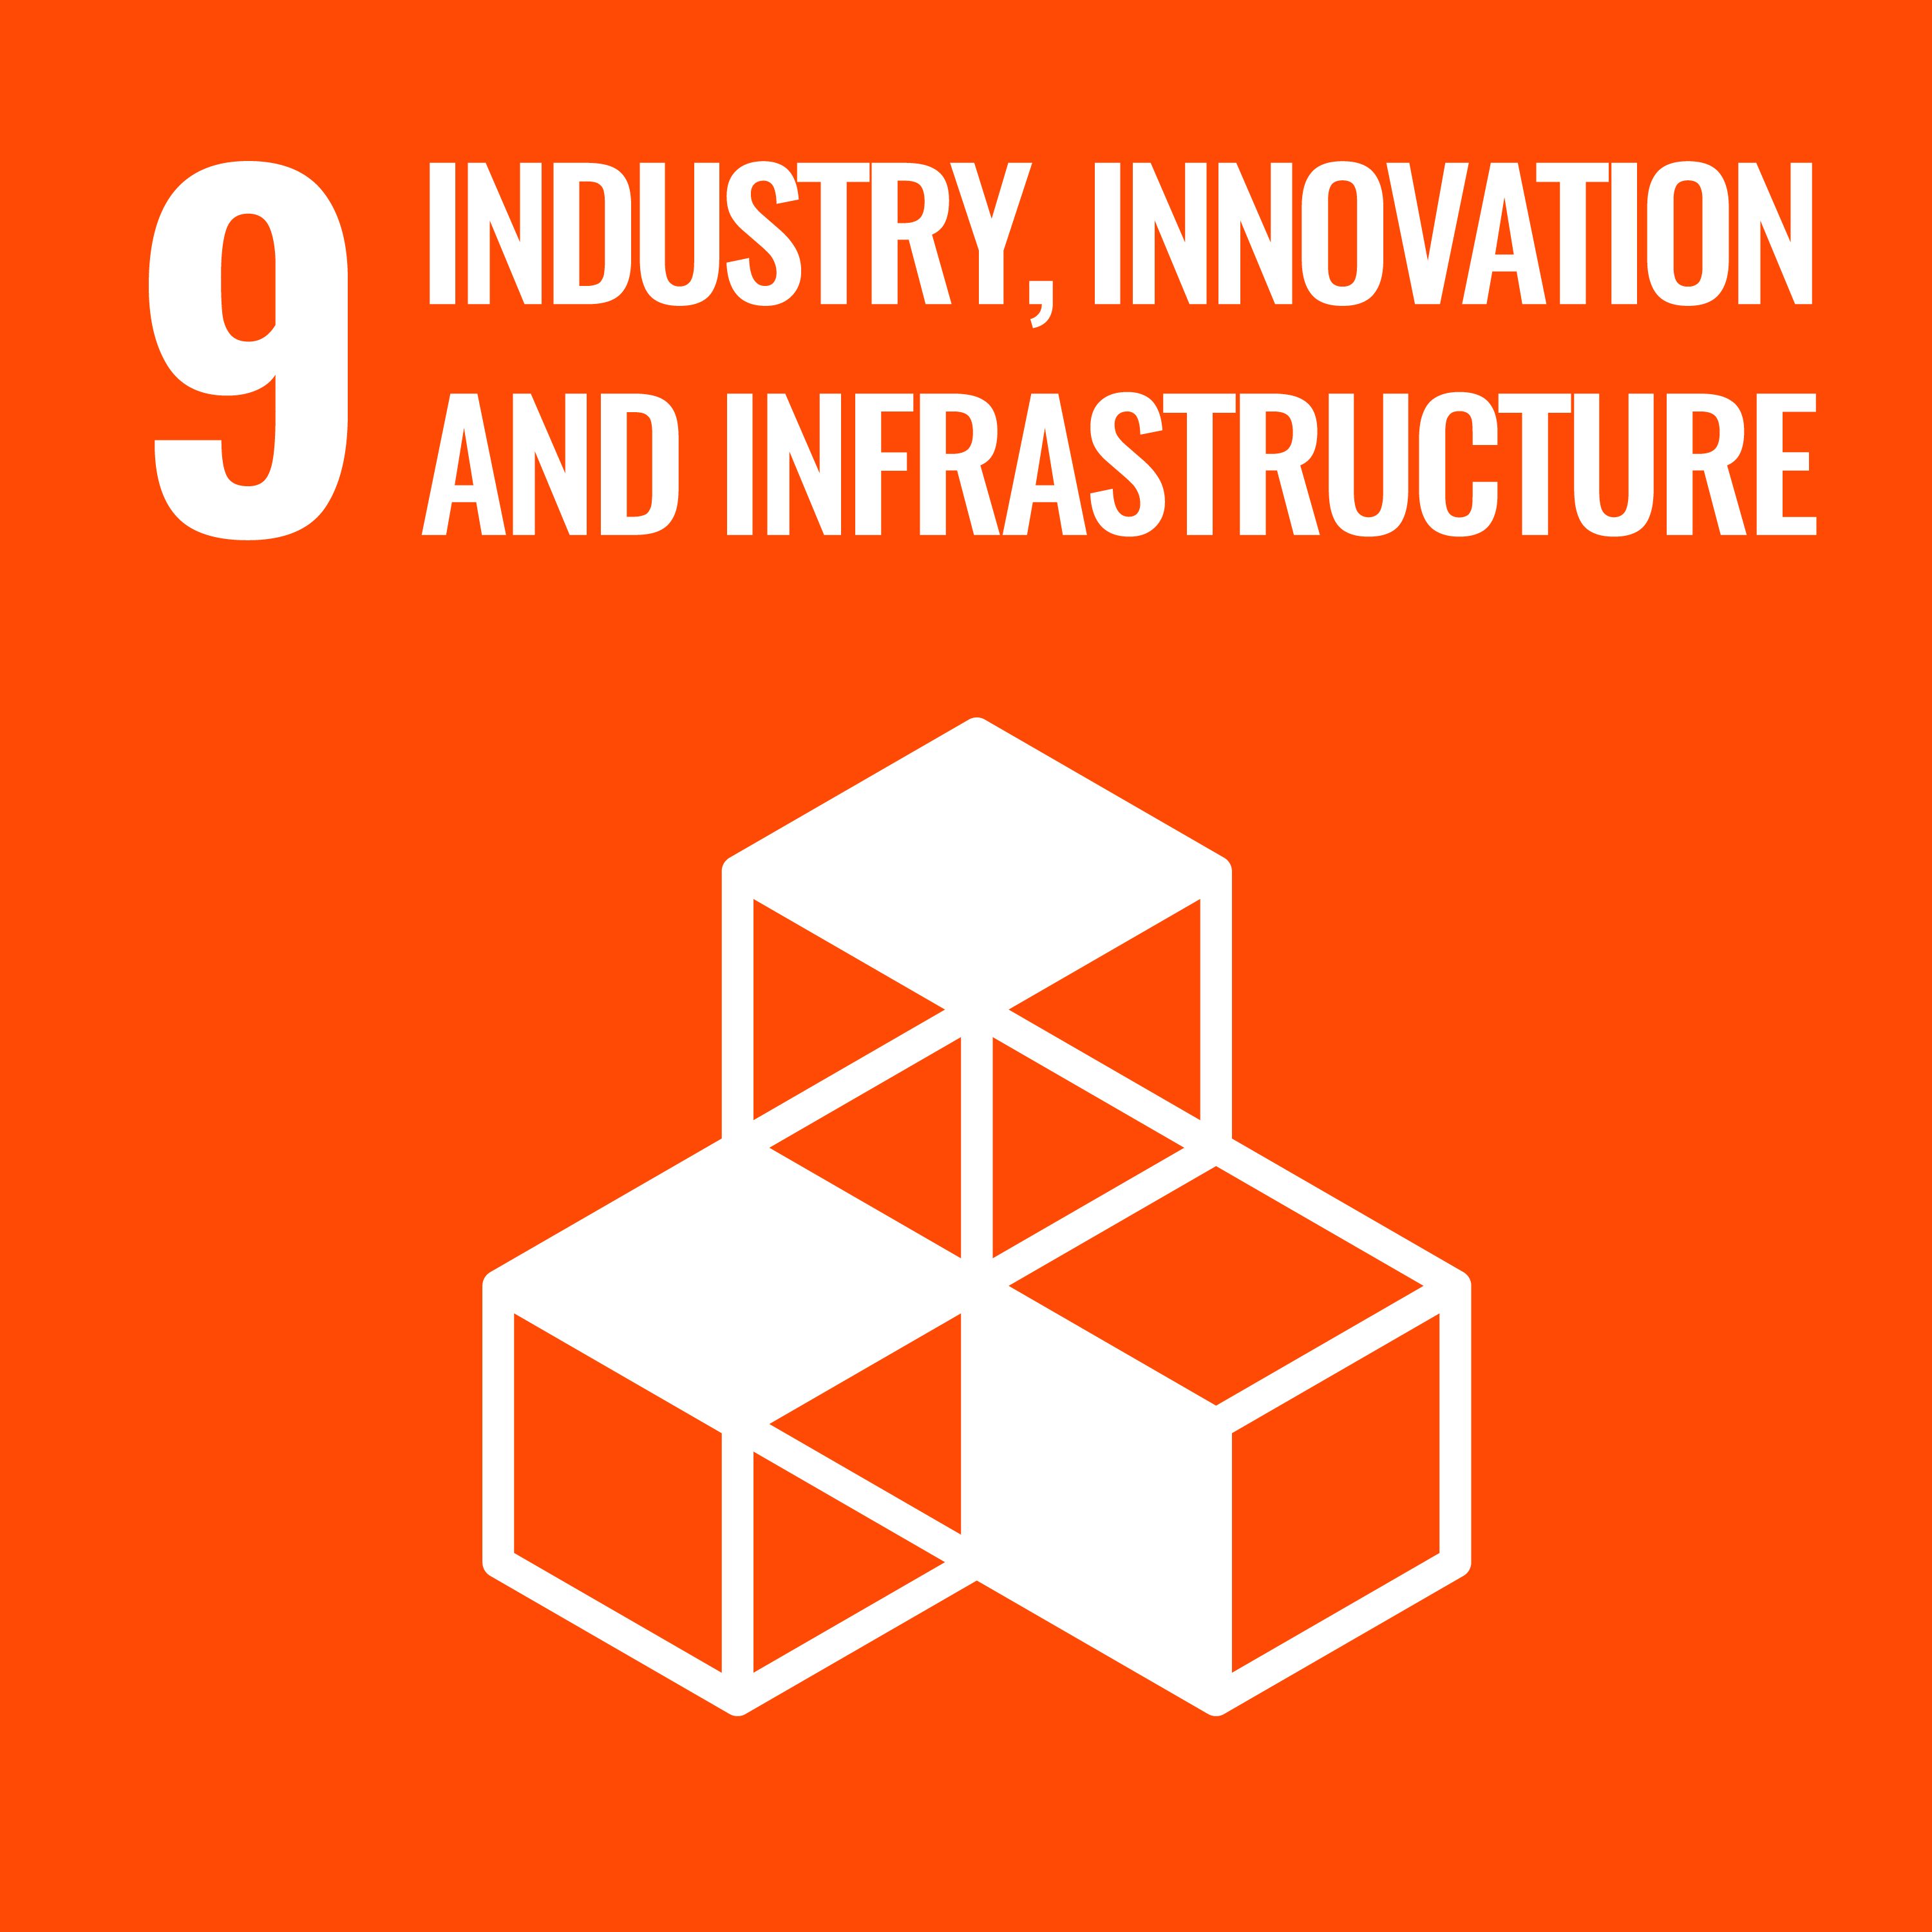 Industri, innovation and infrastructure